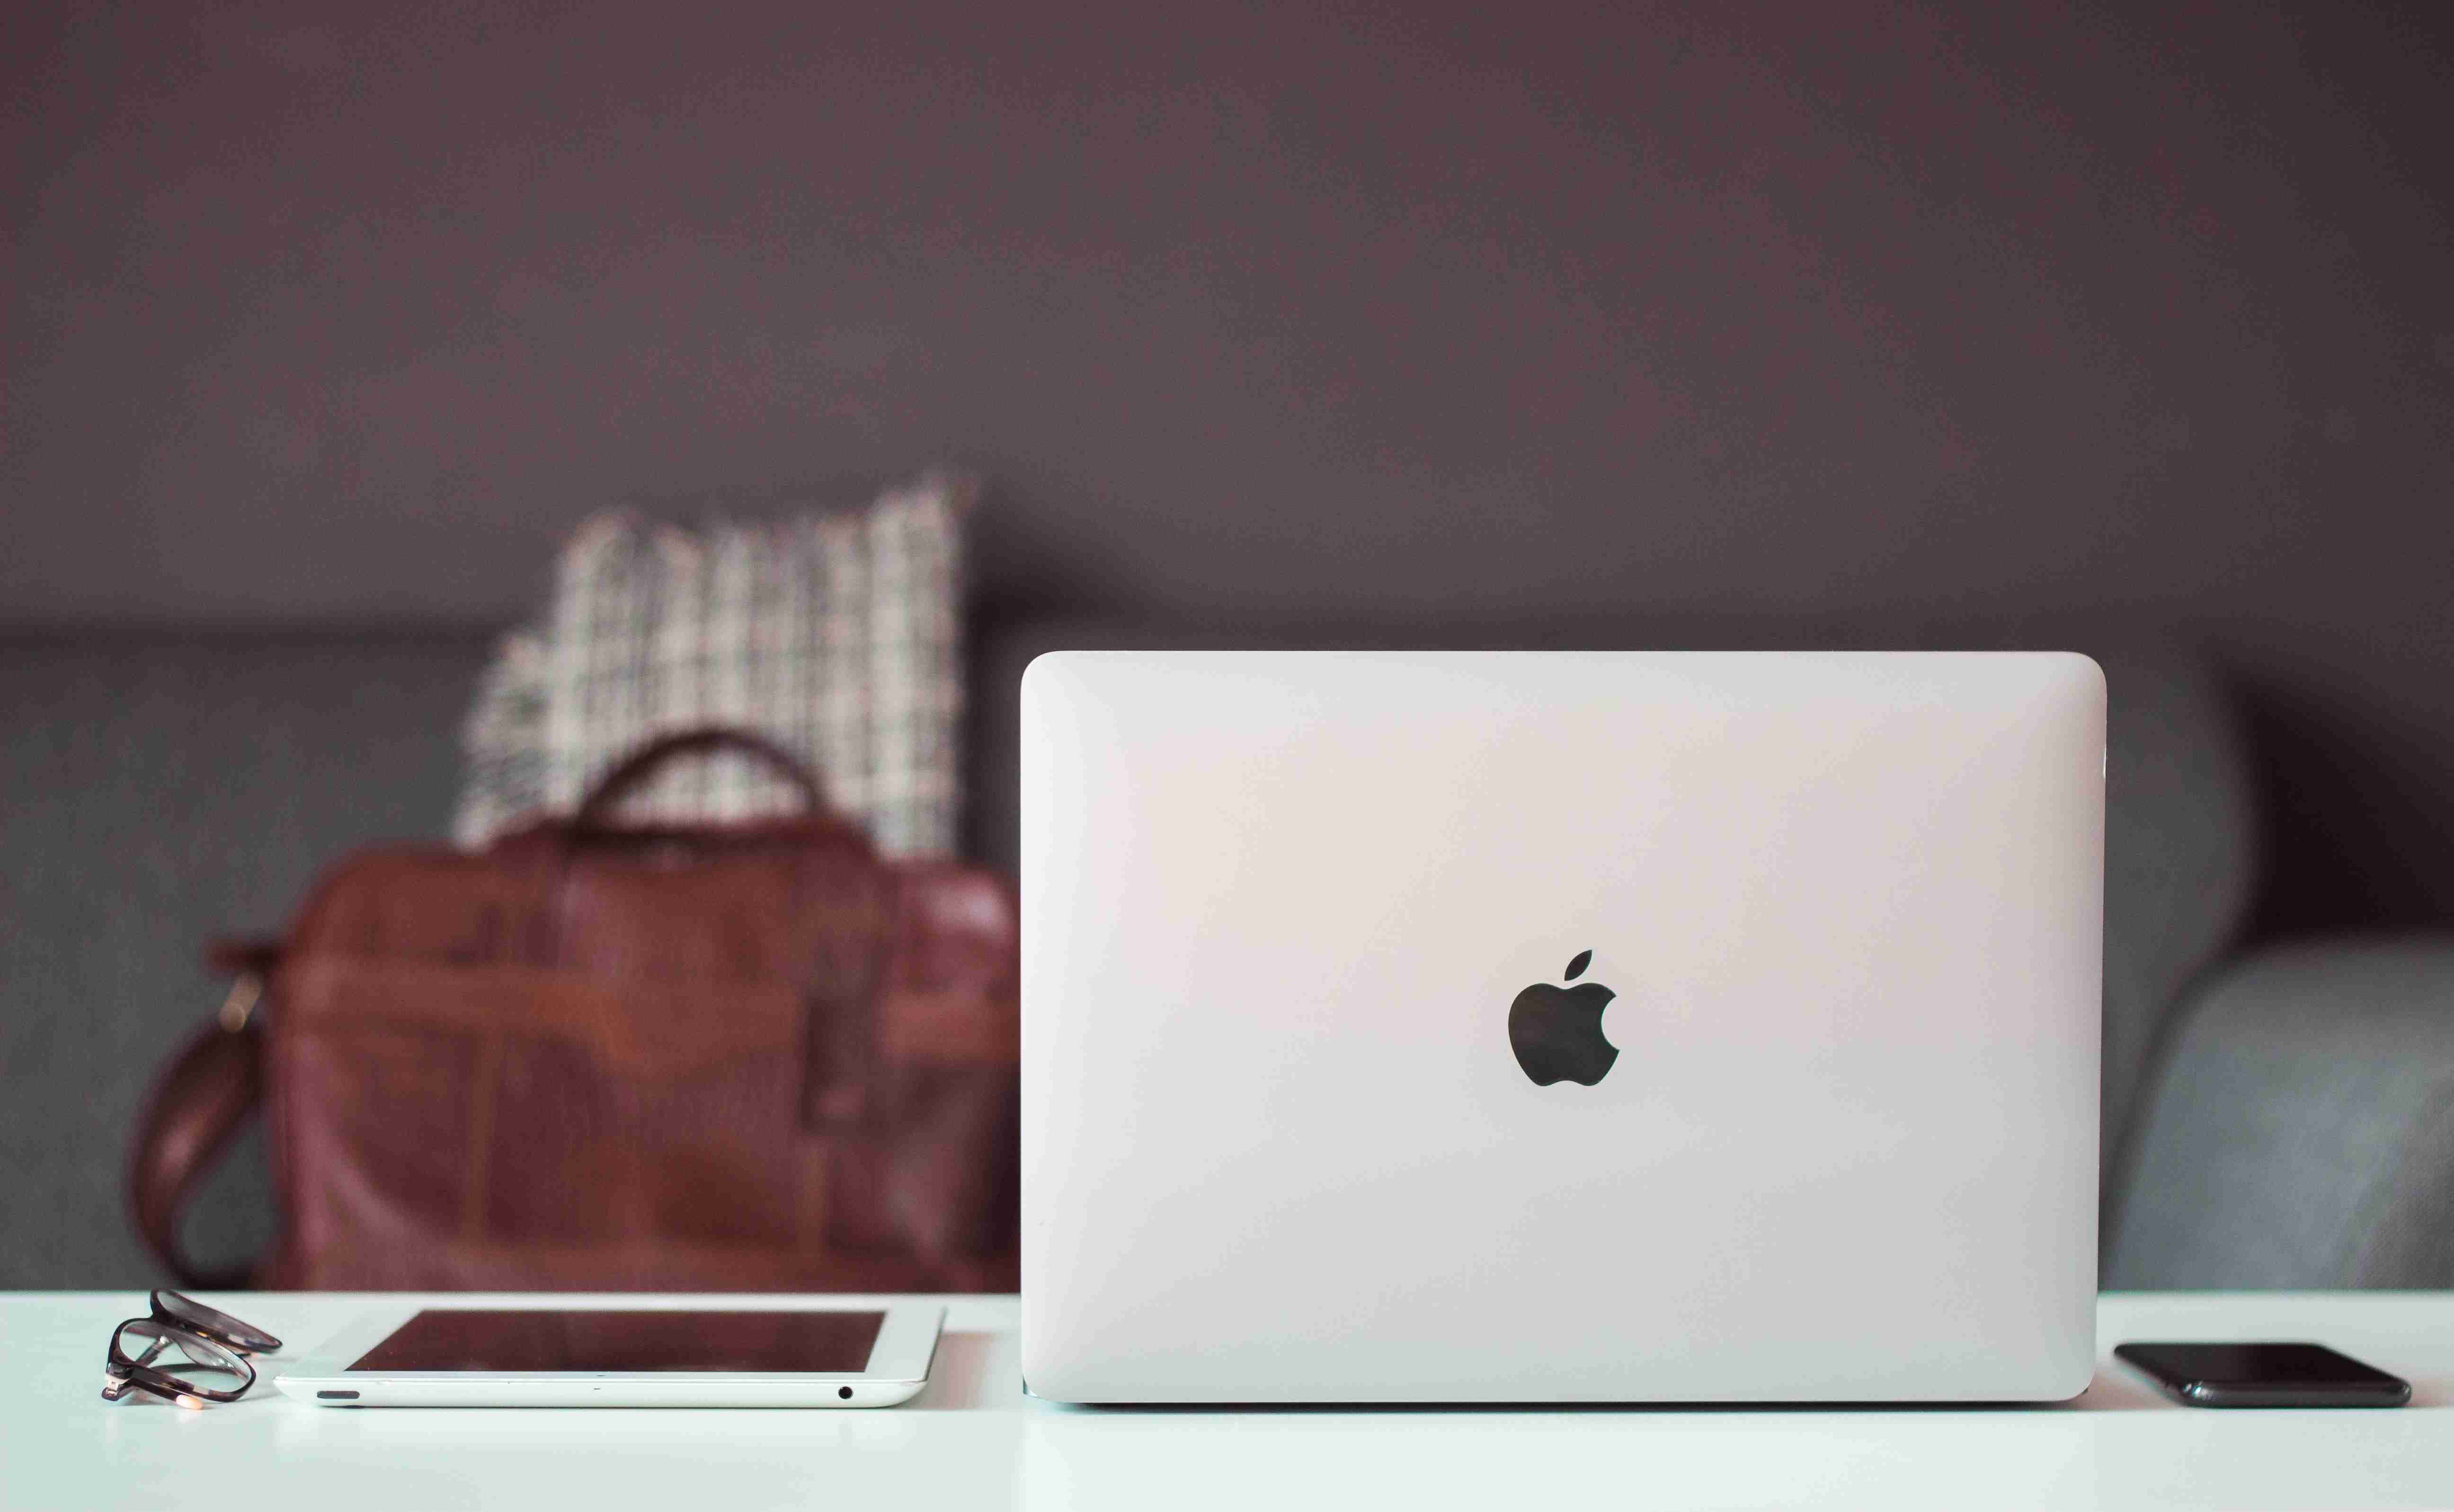 Powering Up Your Macbook: The Ultimate Guide to Troubleshooting Power Adapter Issues